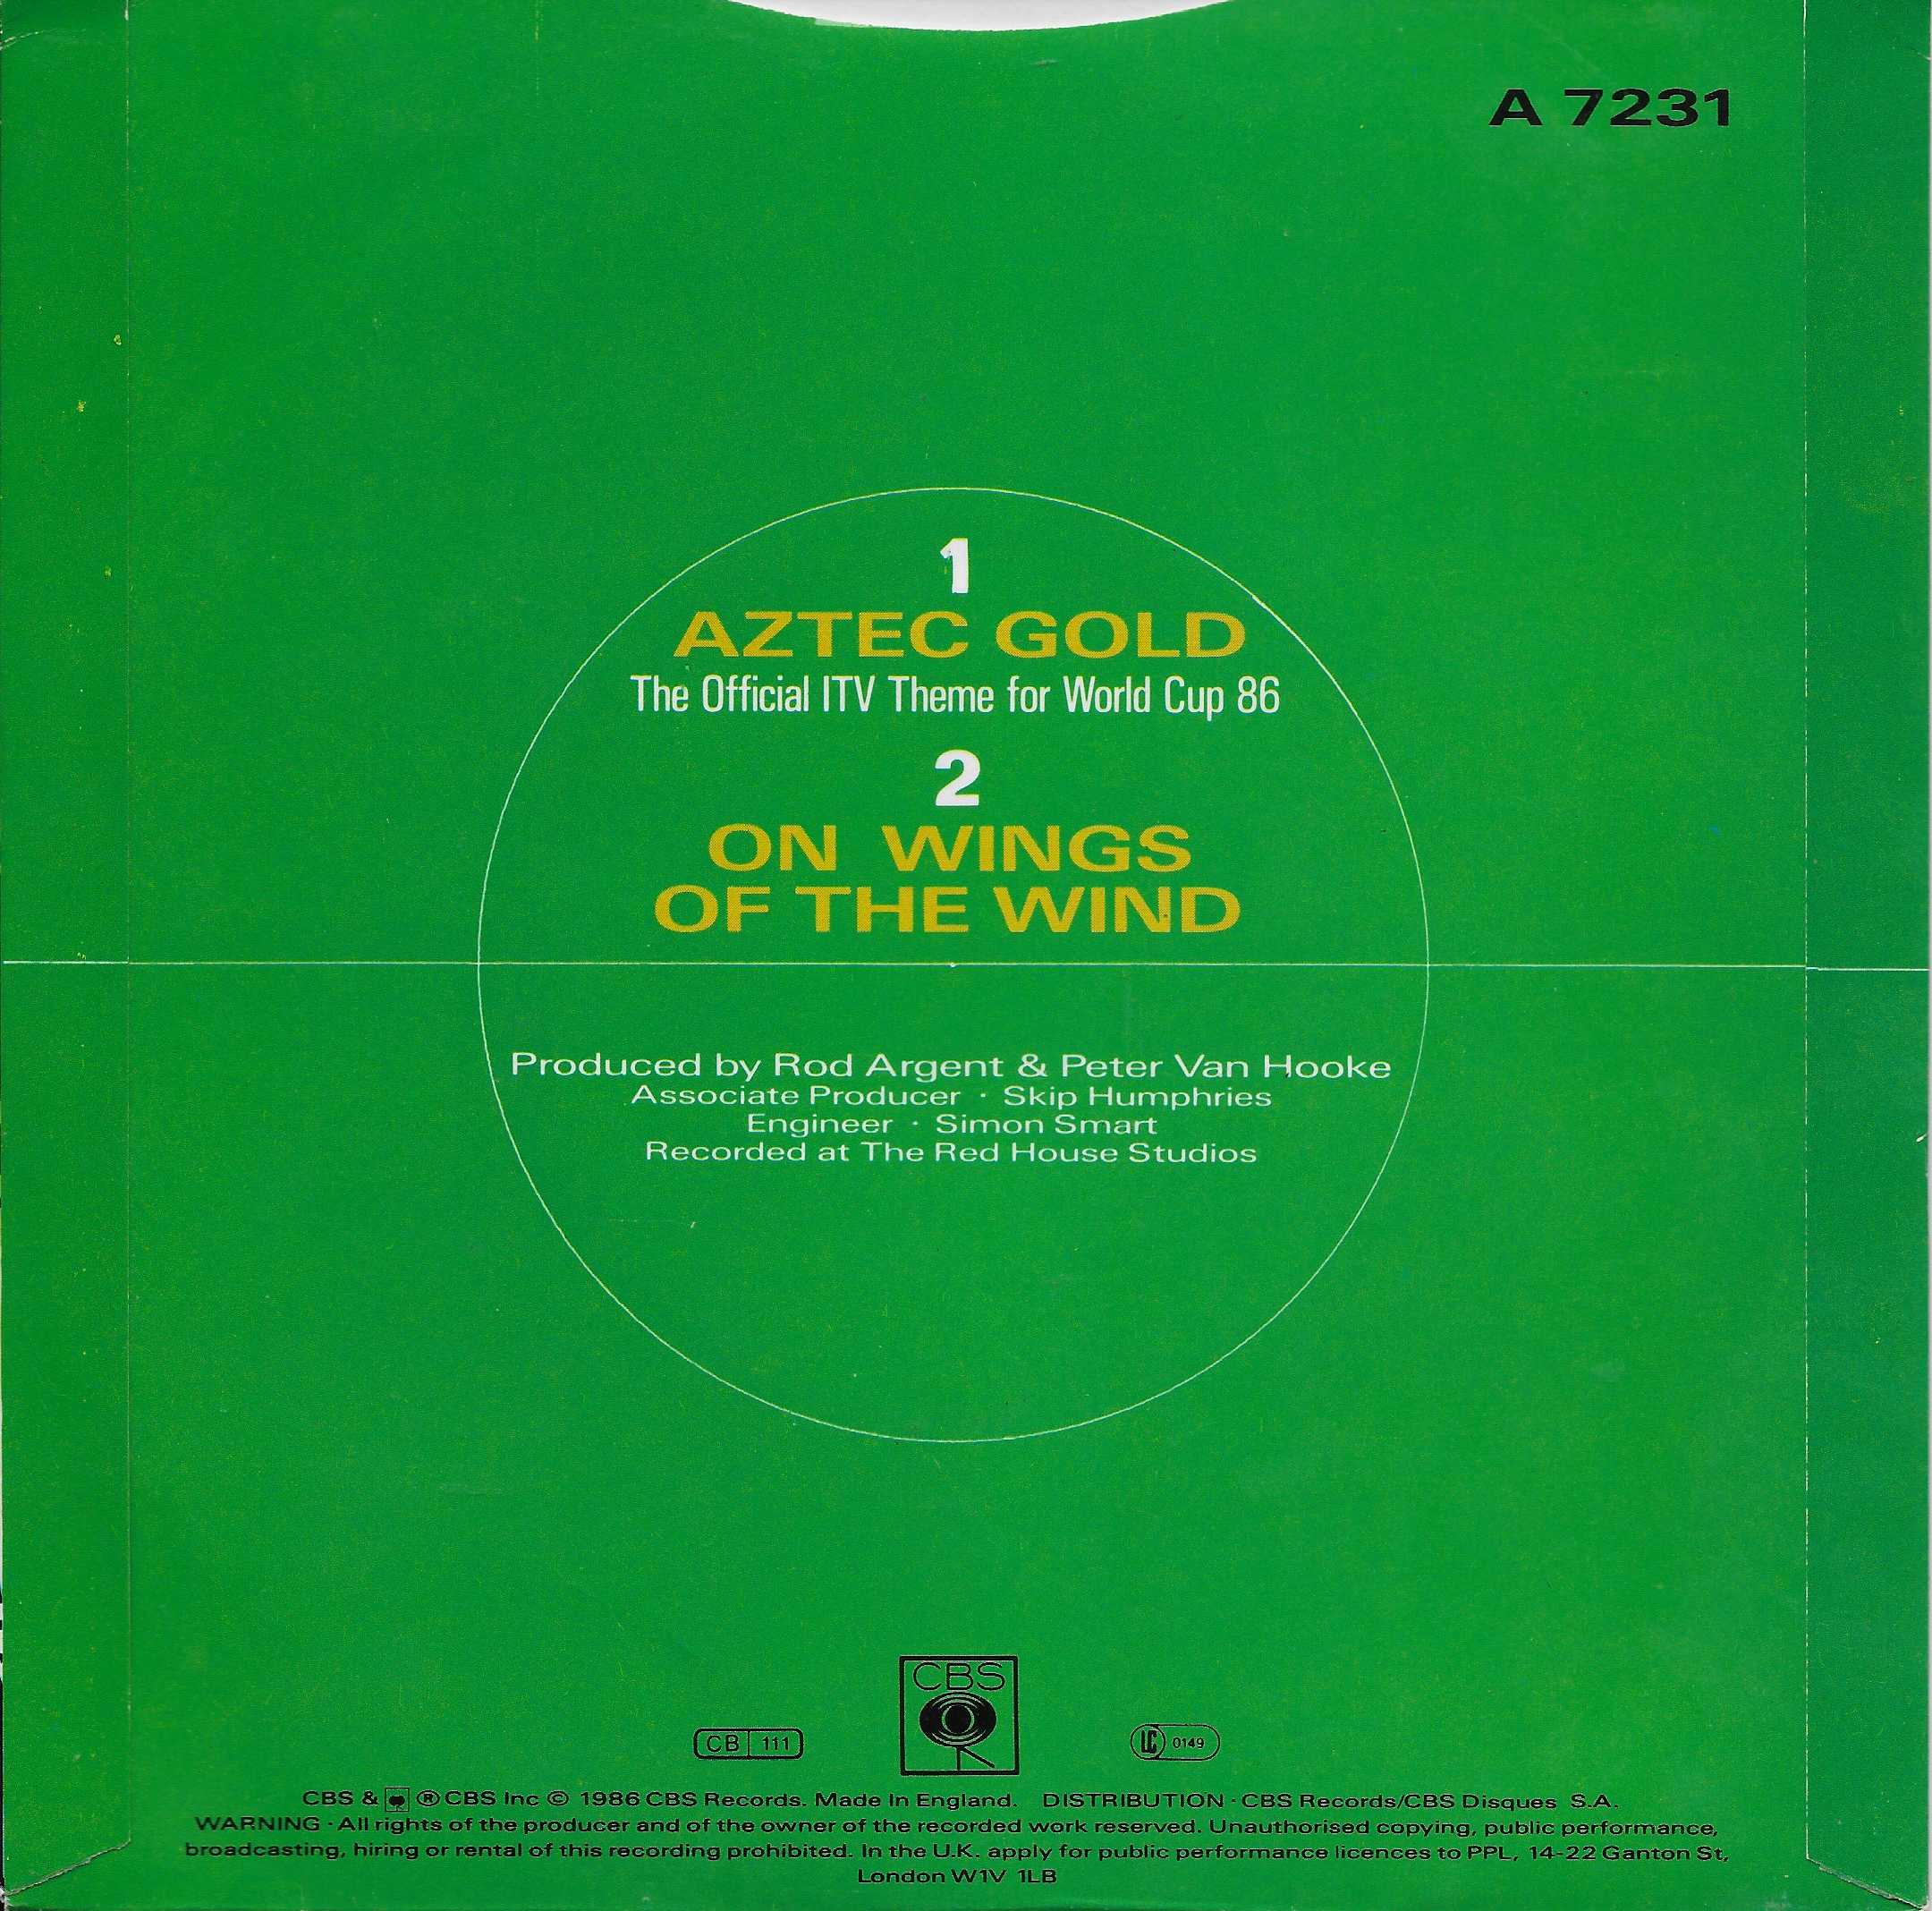 Picture of A 7231 Aztec gold (ITV World Cup theme (1986)) by artist R. Argent / P. Van Hooke from ITV, Channel 4 and Channel 5 library